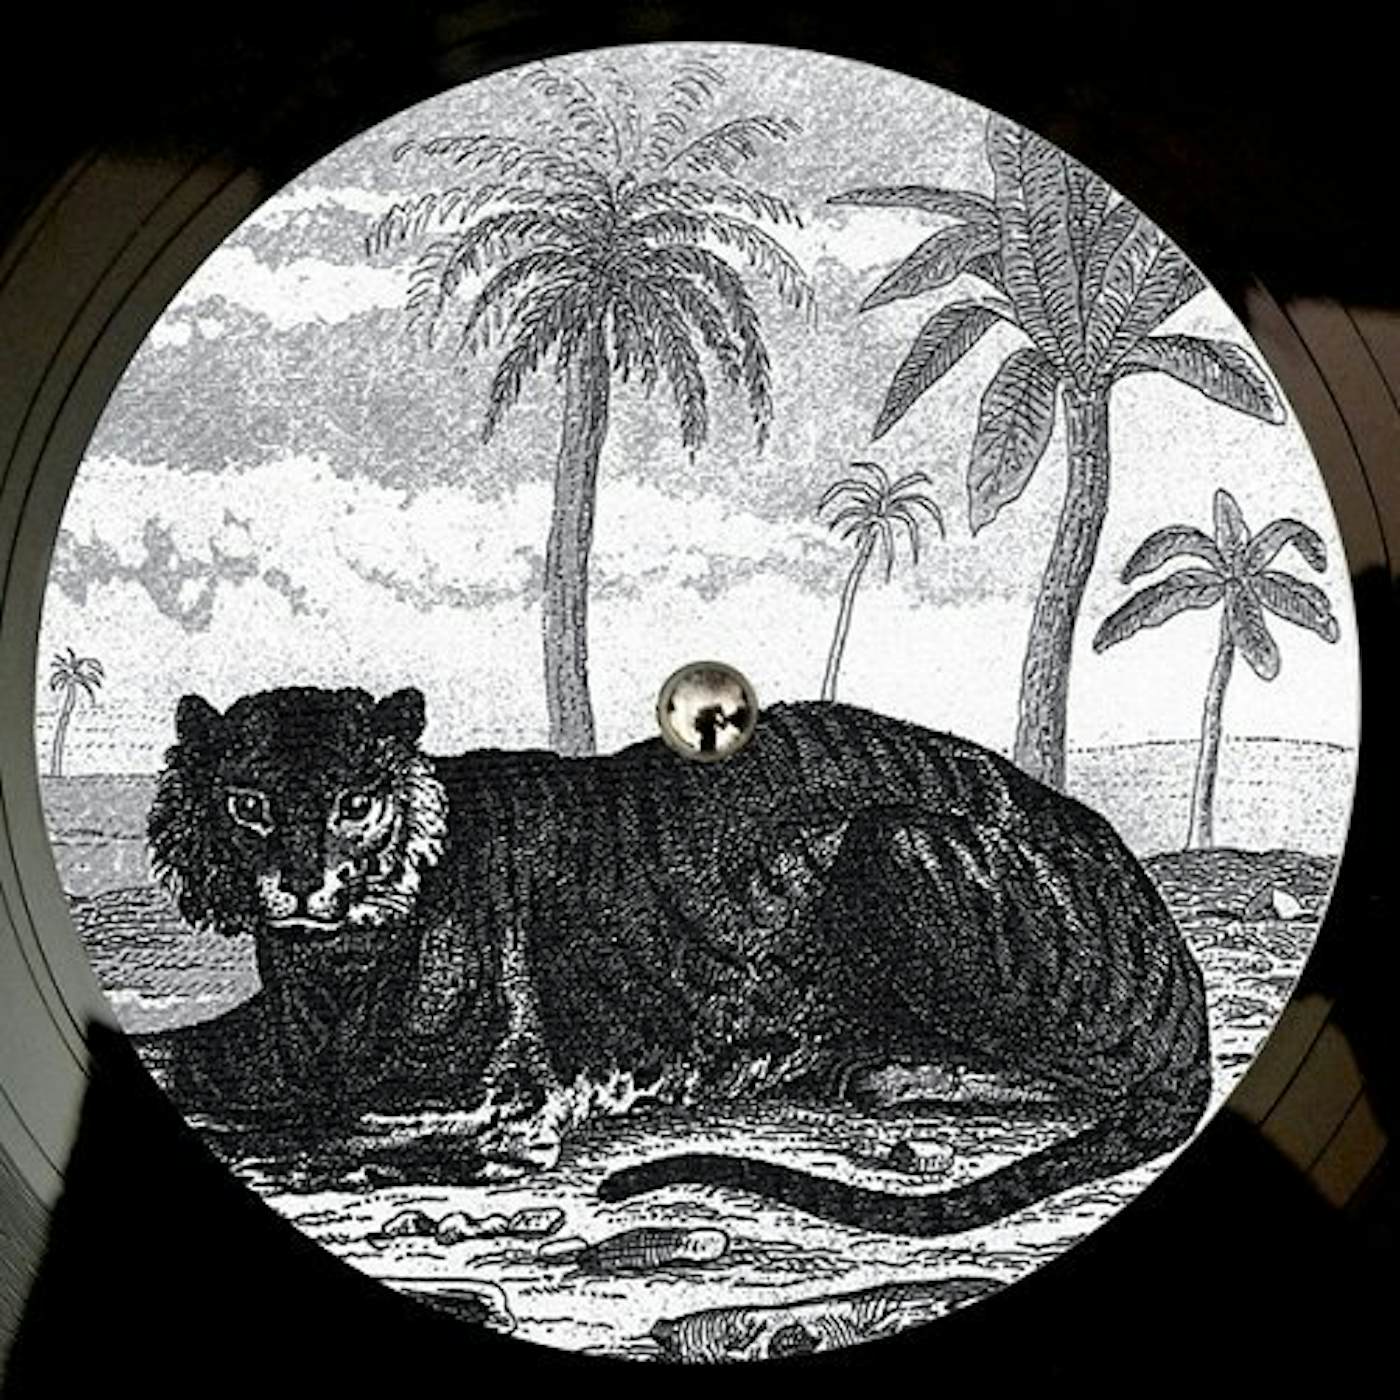 Tigerskin TRY THE IMPOSSIBLE Vinyl Record